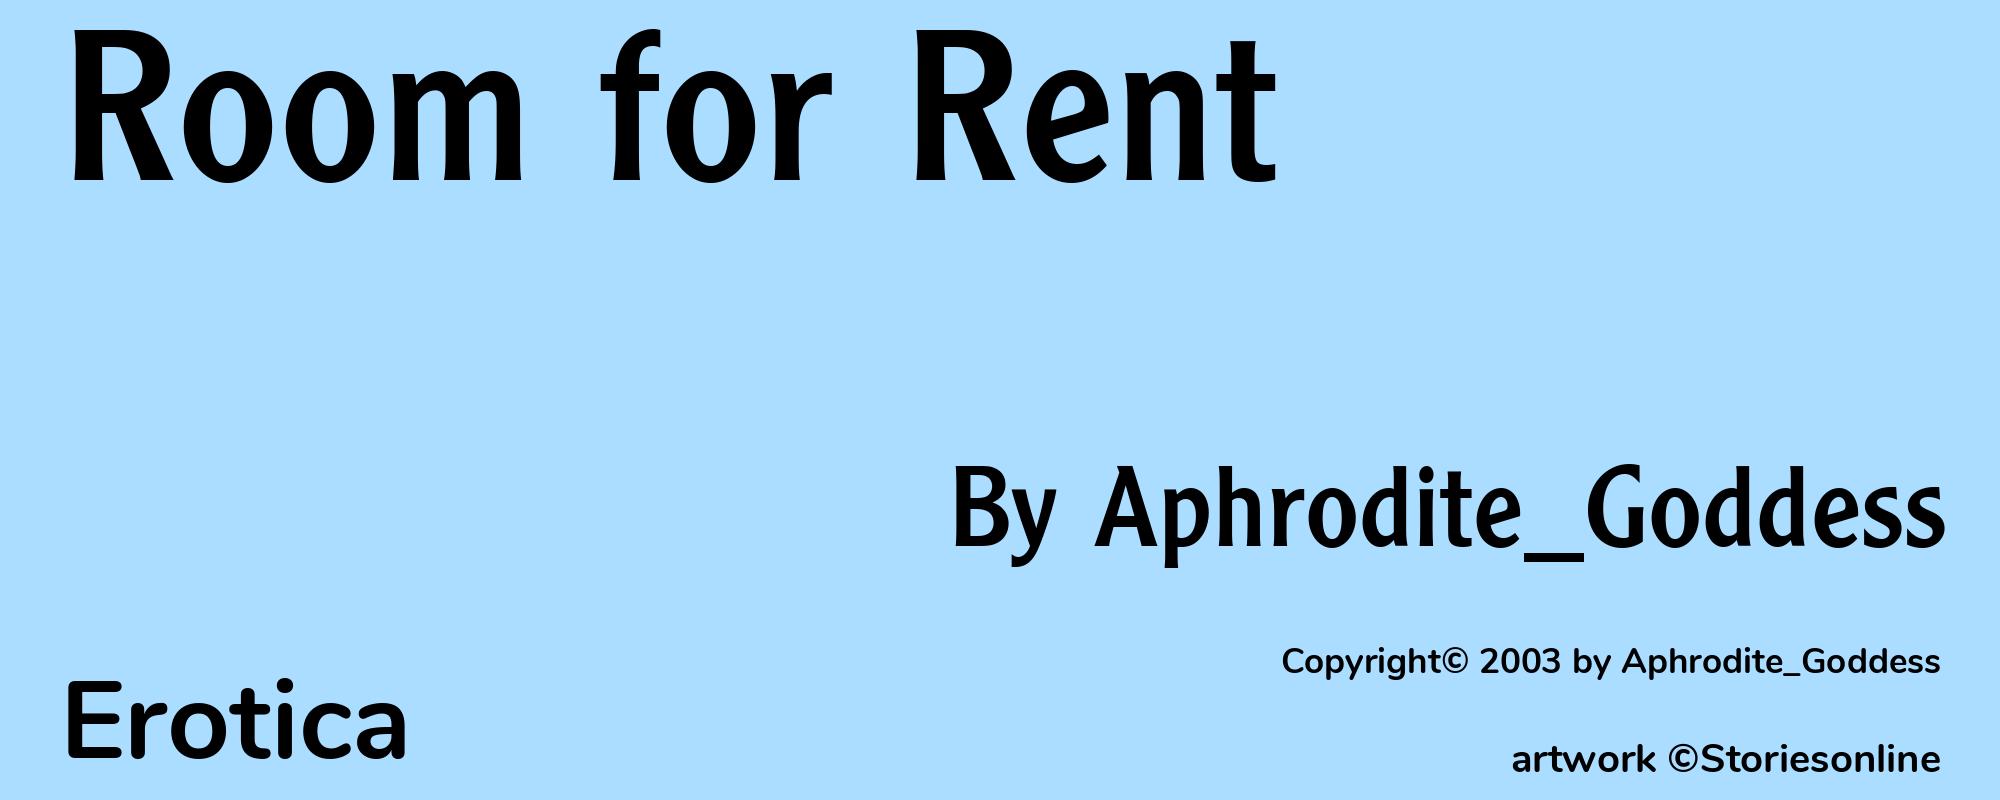 Room for Rent - Cover